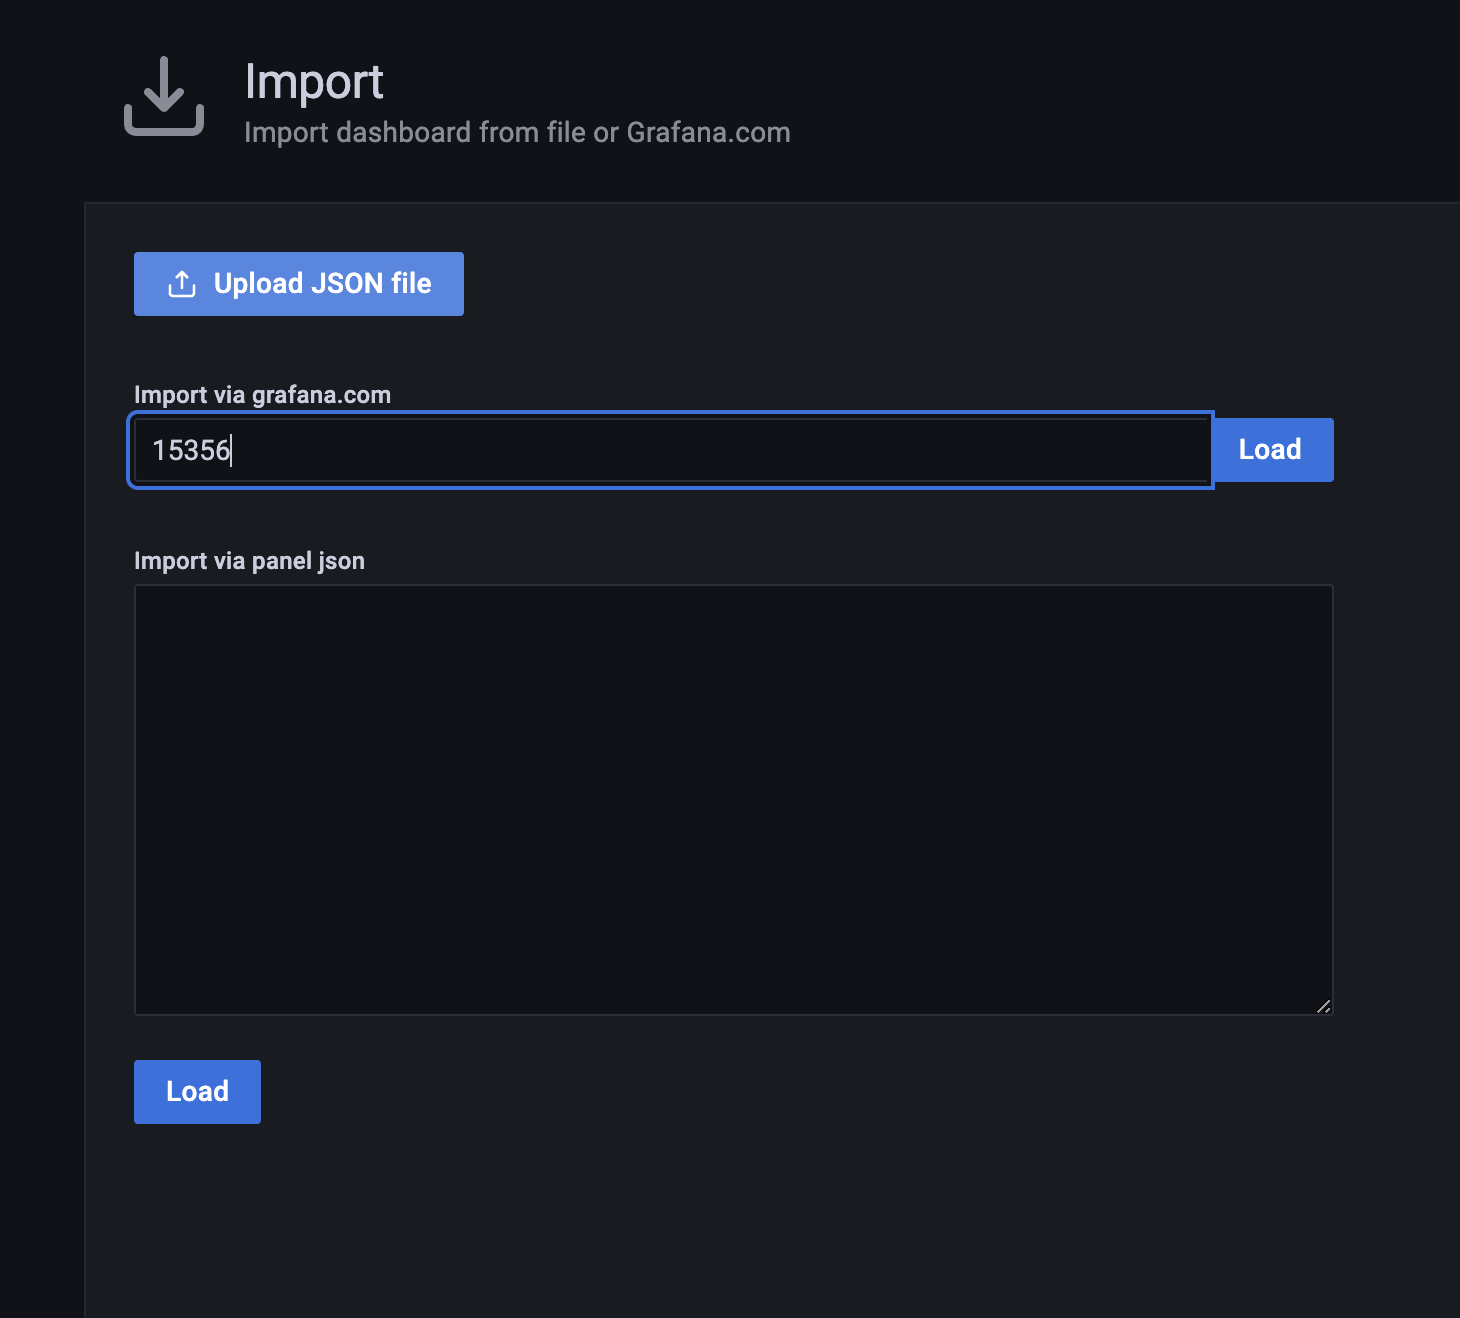 Monitoring Proxmox with InfluxDB and Grafana